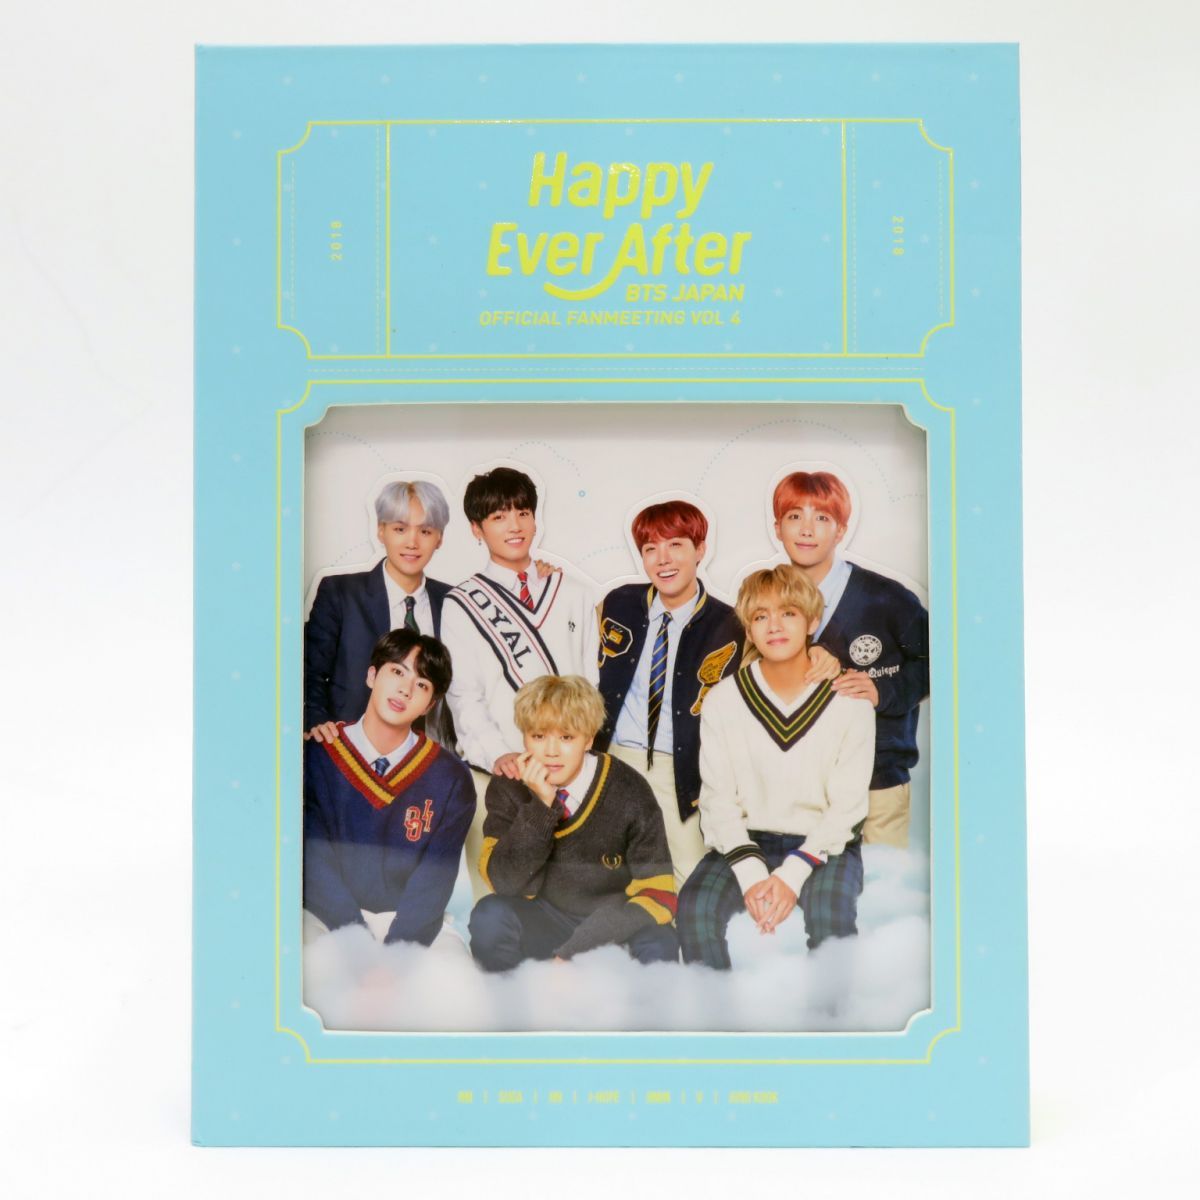 3DVD BTS JAPAN OFFICIAL FANMEETING VOL 4 [Happy Ever After] ※中古 - メルカリ